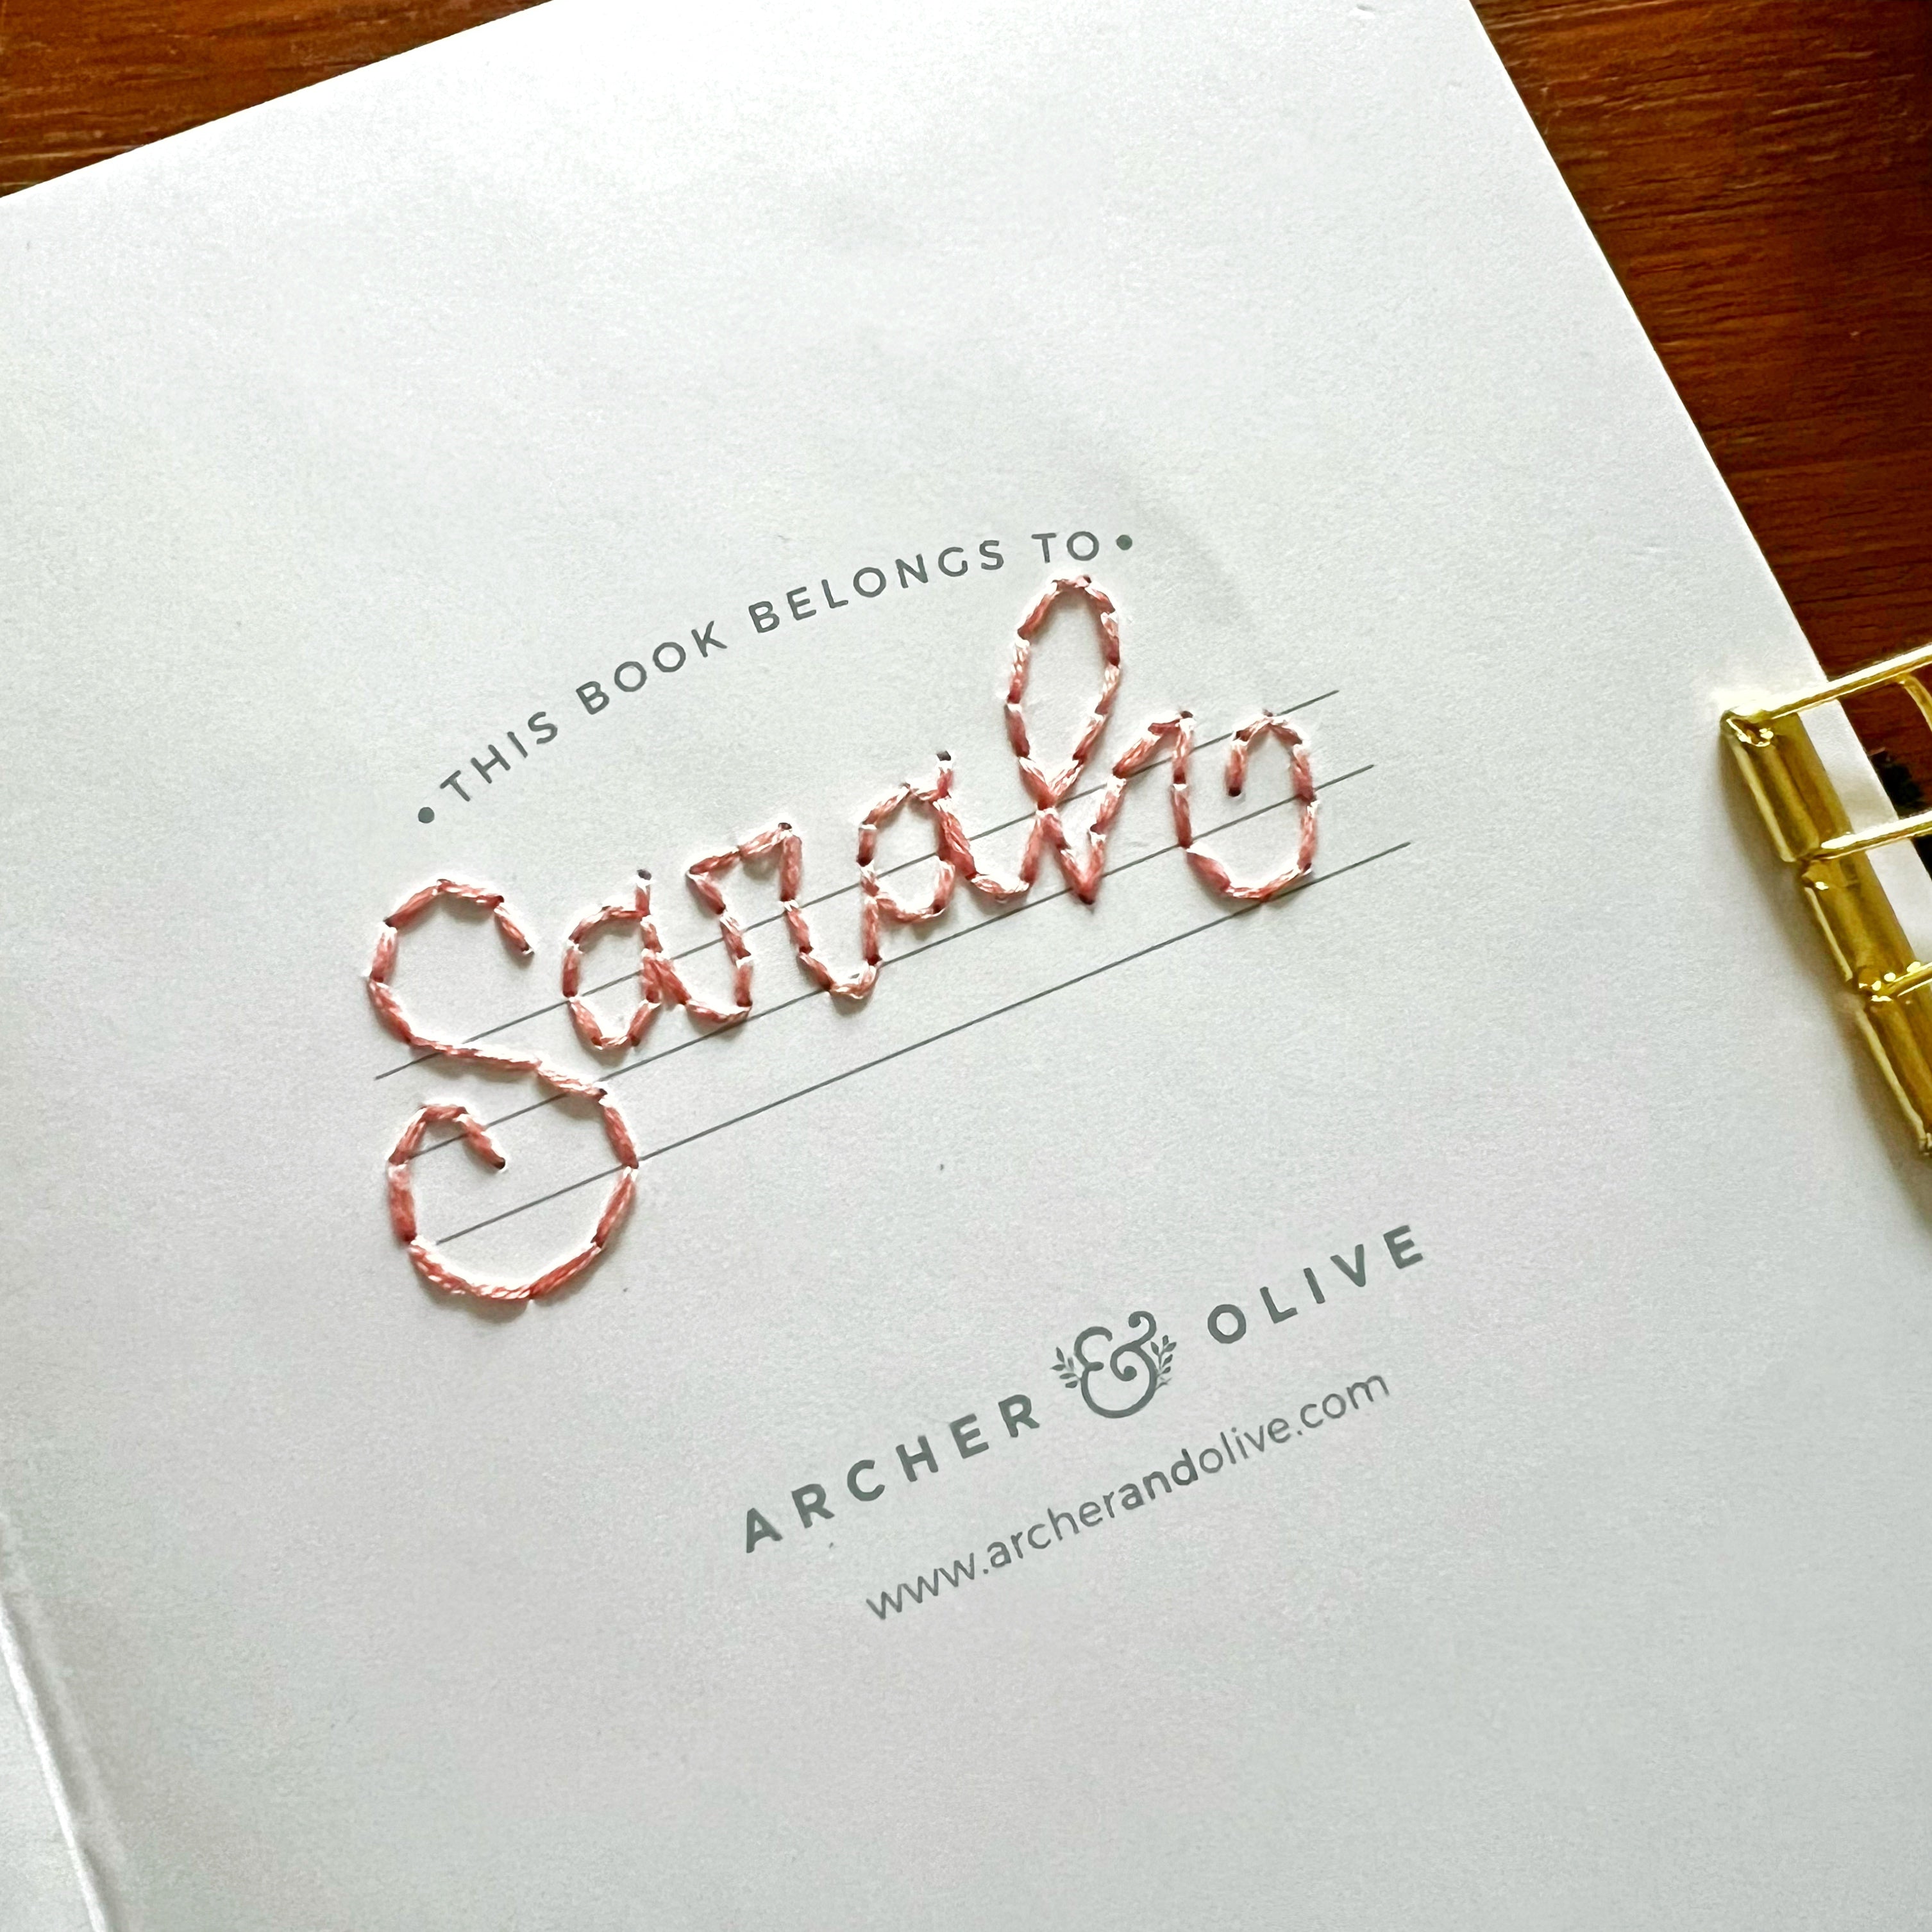 Inside cover of notebook with embroidered name “Sarah”